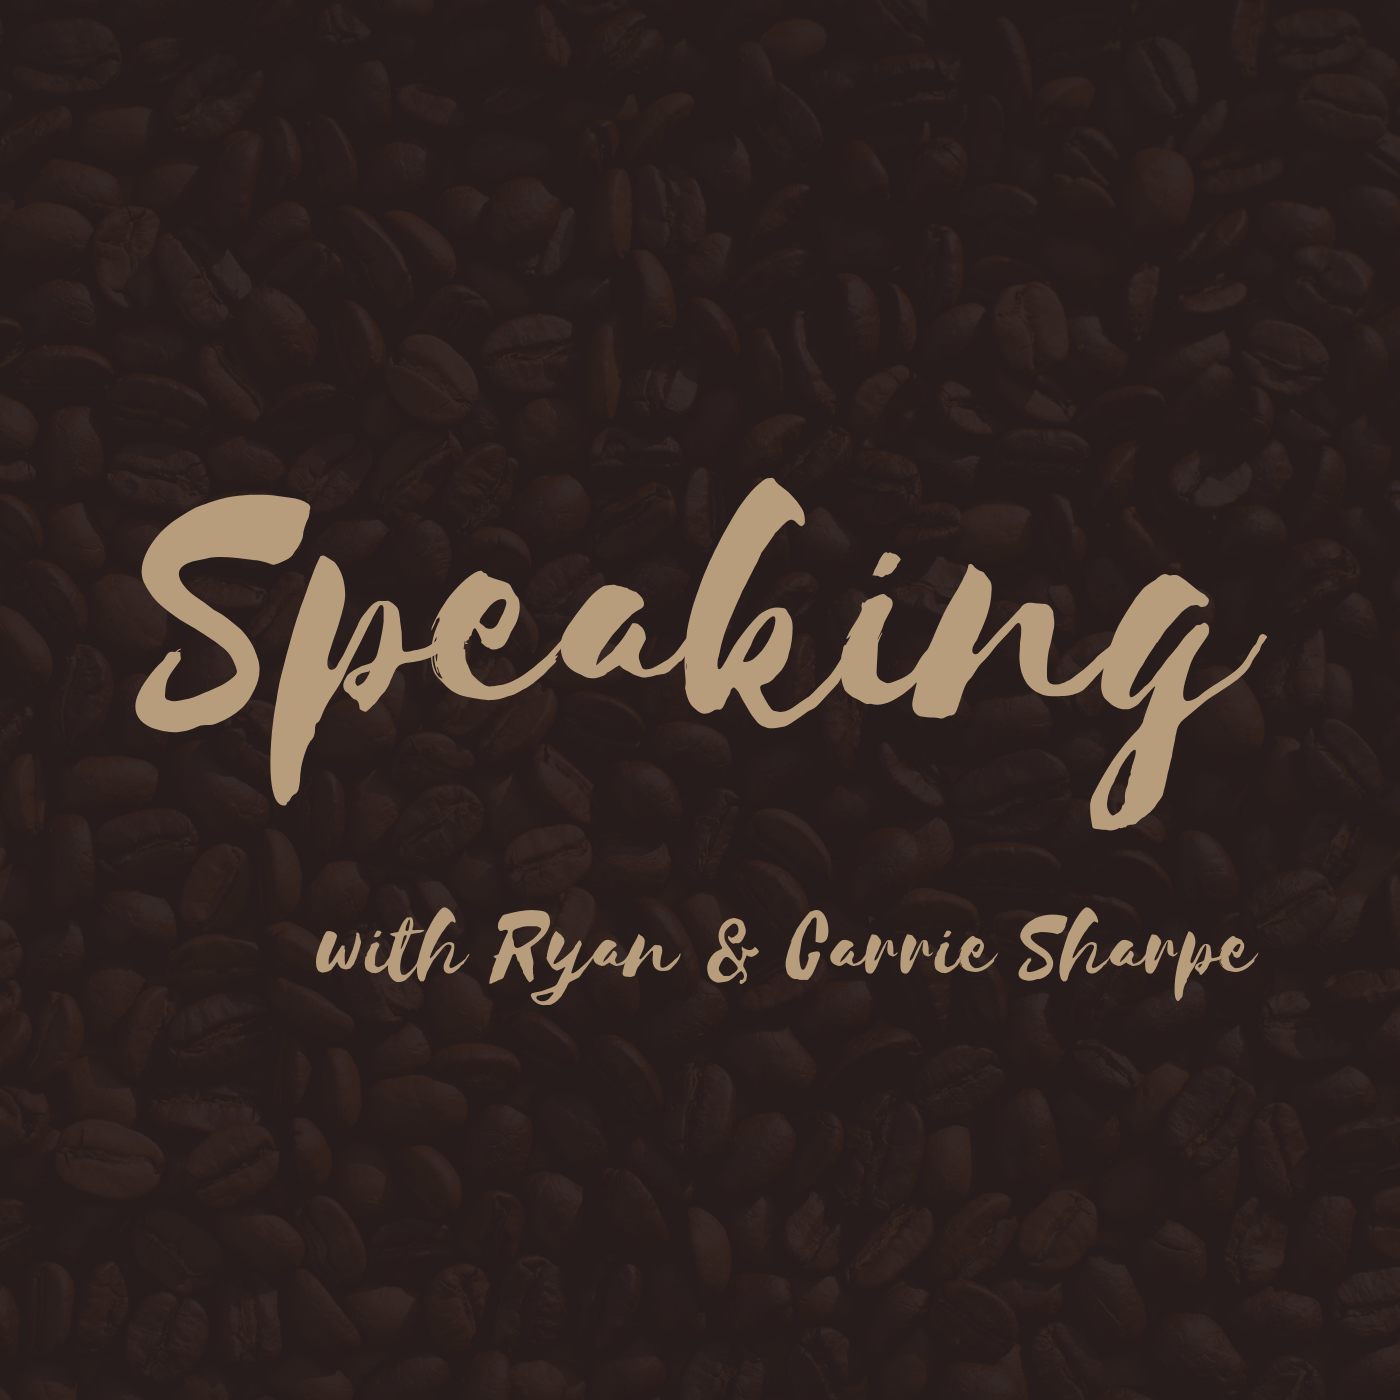 Speaking with Ryan & Carrie Sharpe podcast